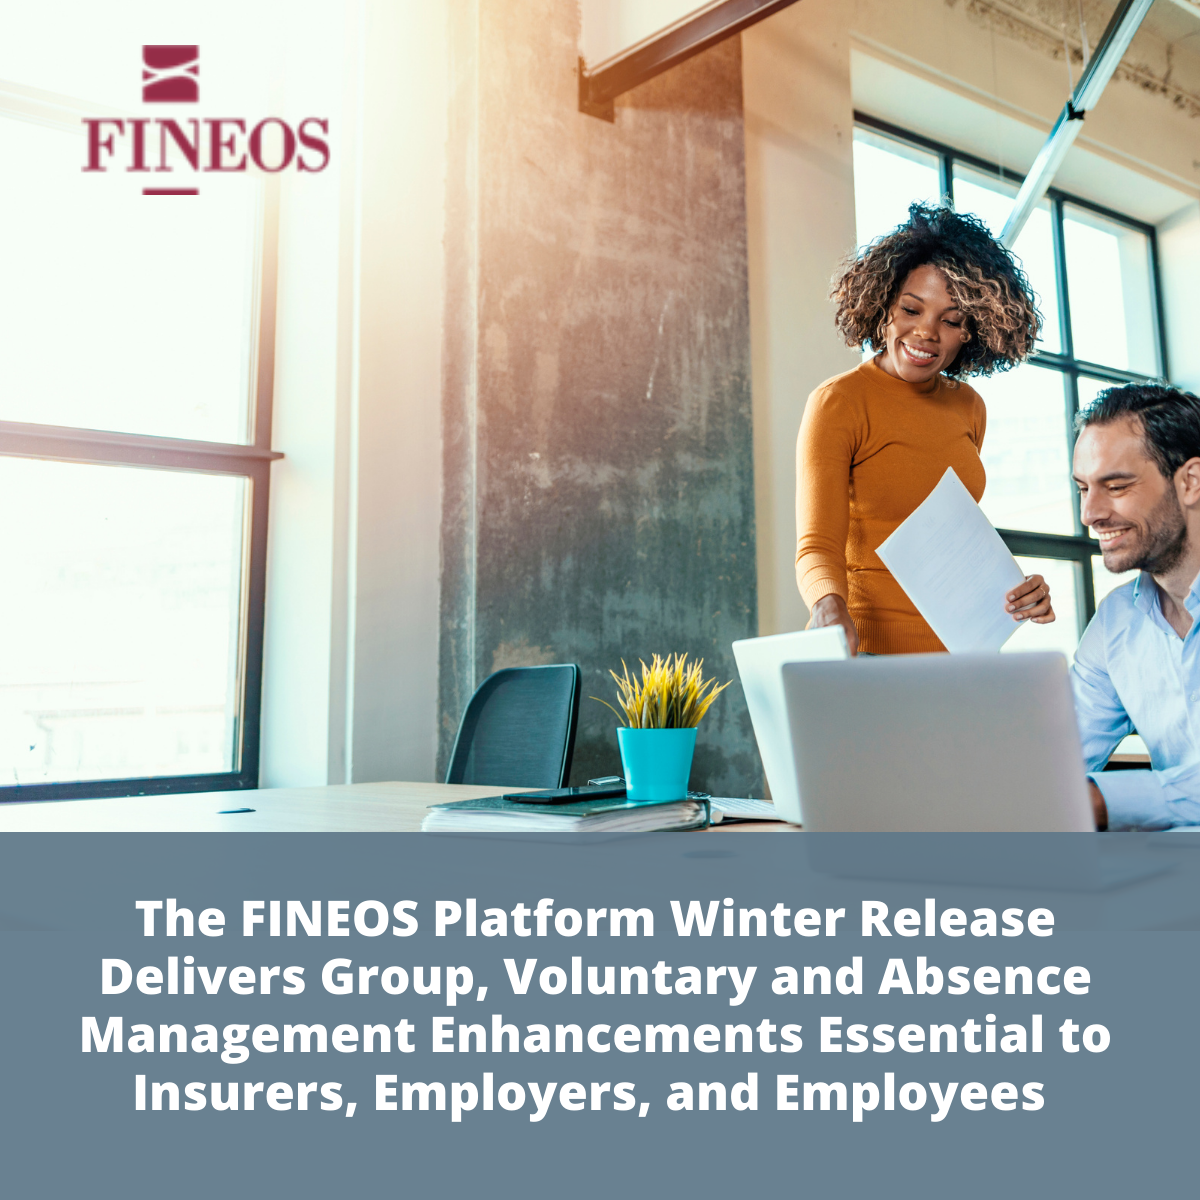 The FINEOS Platform Winter Release Delivers Group, Voluntary and Absence Management Enhancements Essential to Insurers, Employers, and Employees